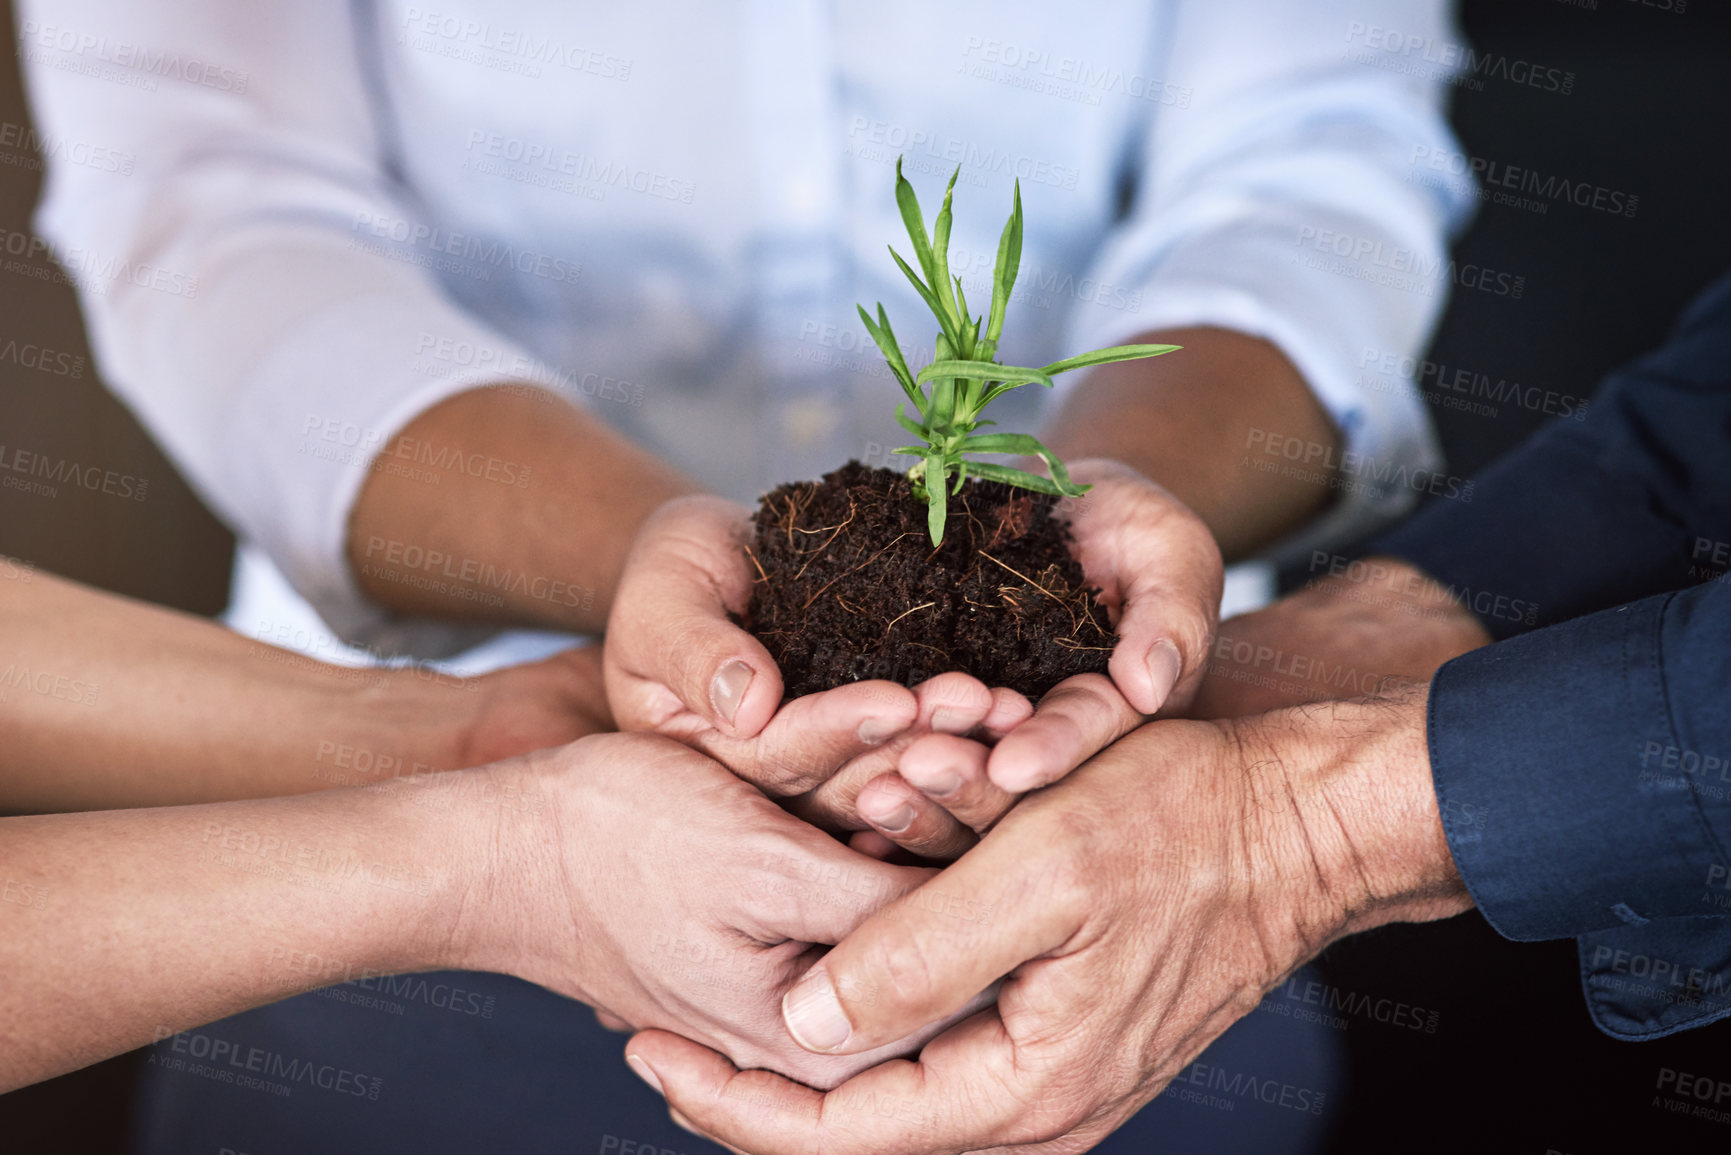 Buy stock photo Shhot of a group of businesspeople's hands holding a young plant in soil